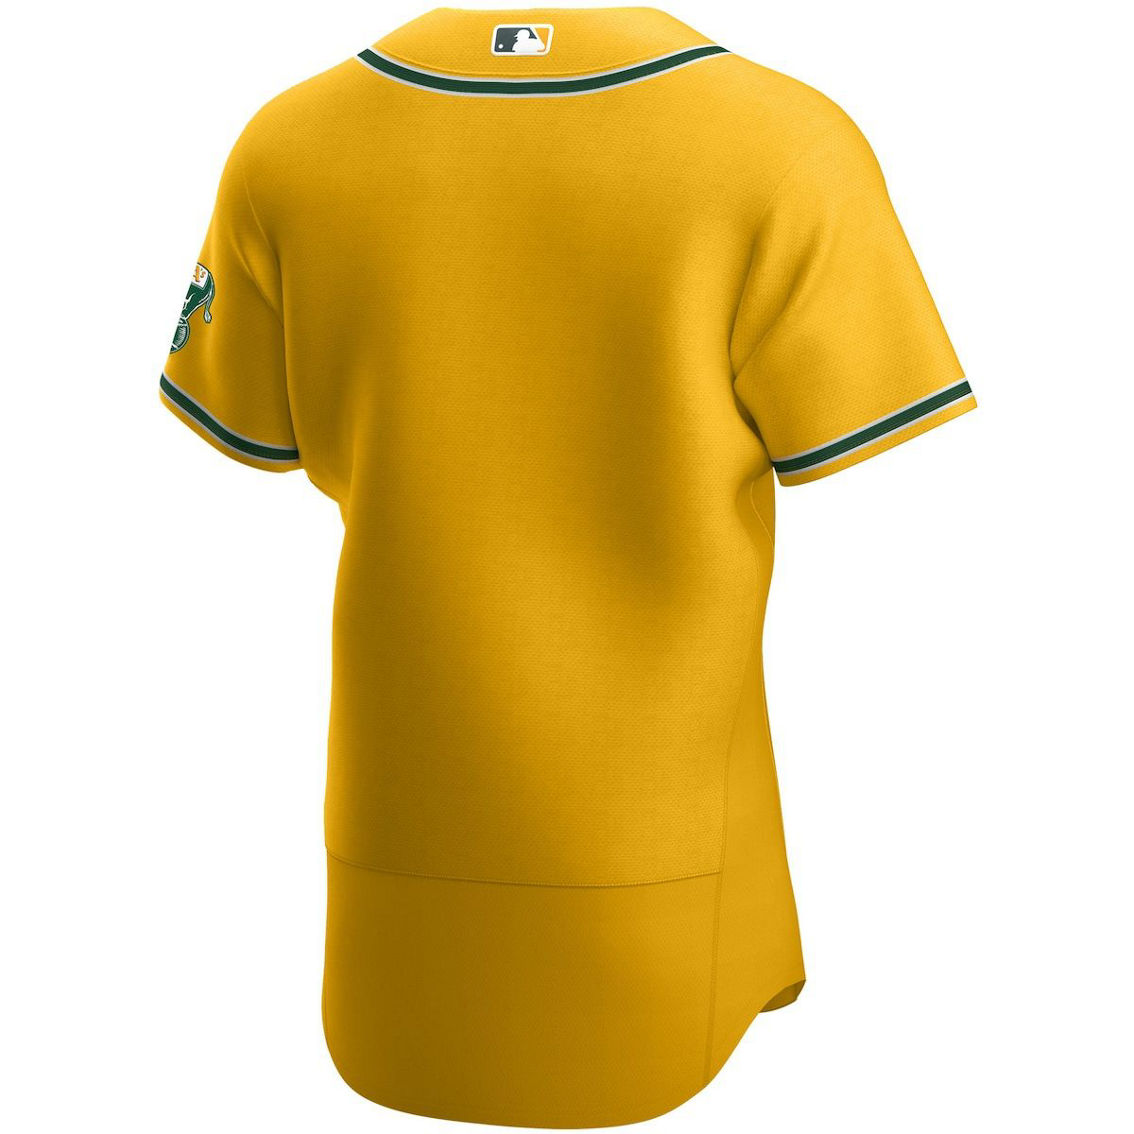 Nike Men's Gold Oakland Athletics Authentic Official Team Jersey - Image 4 of 4